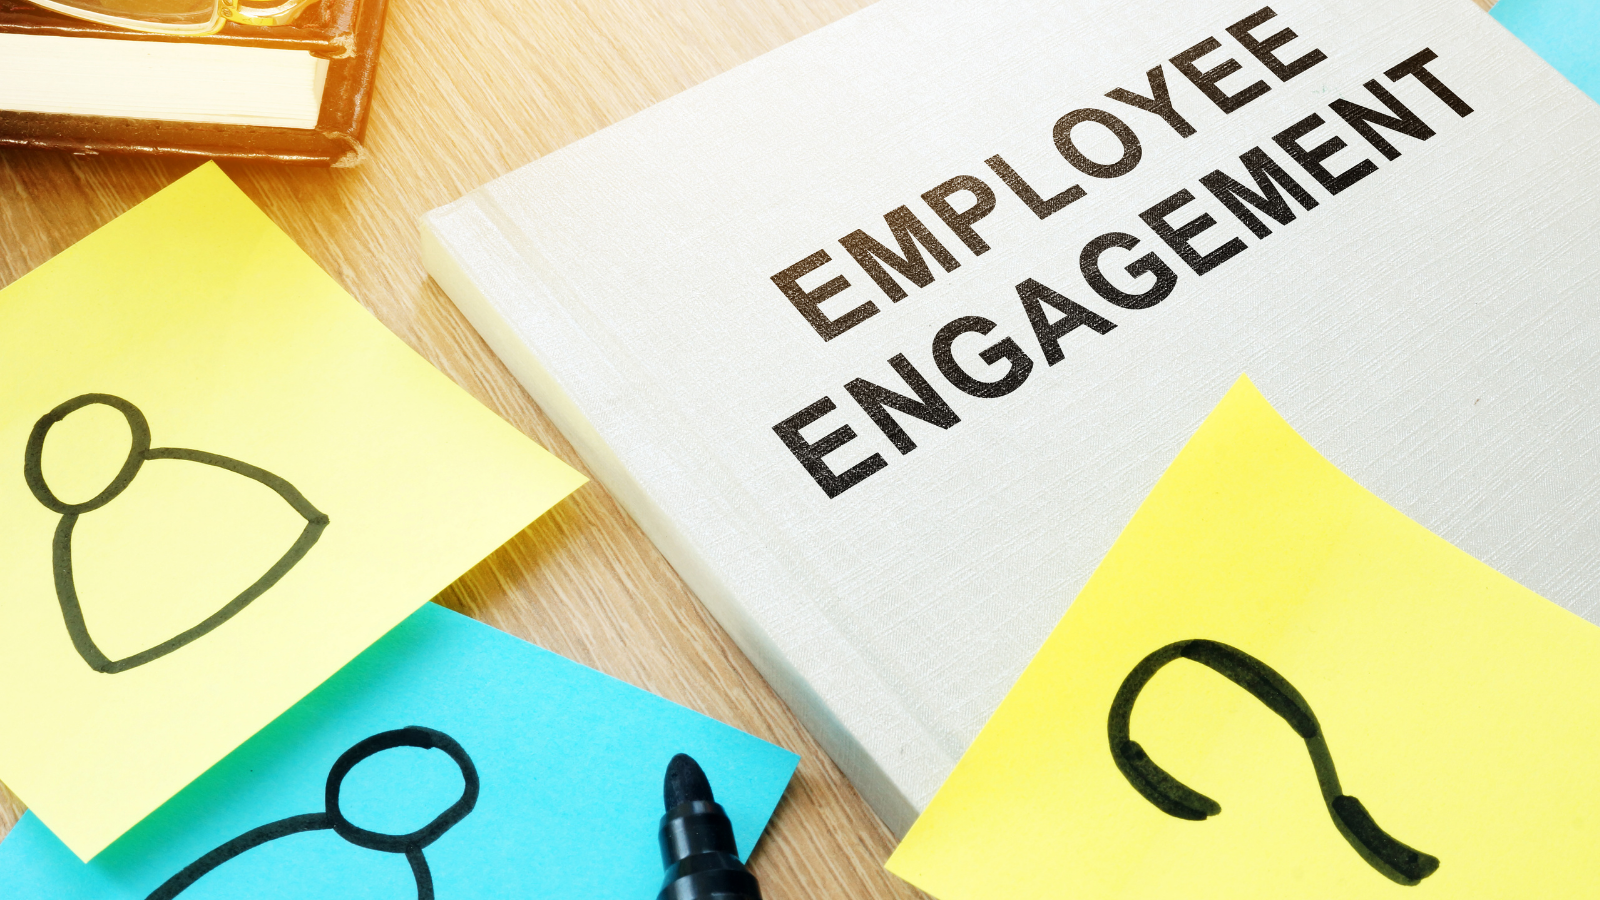 The Ultimate Guide to Employee Engagement